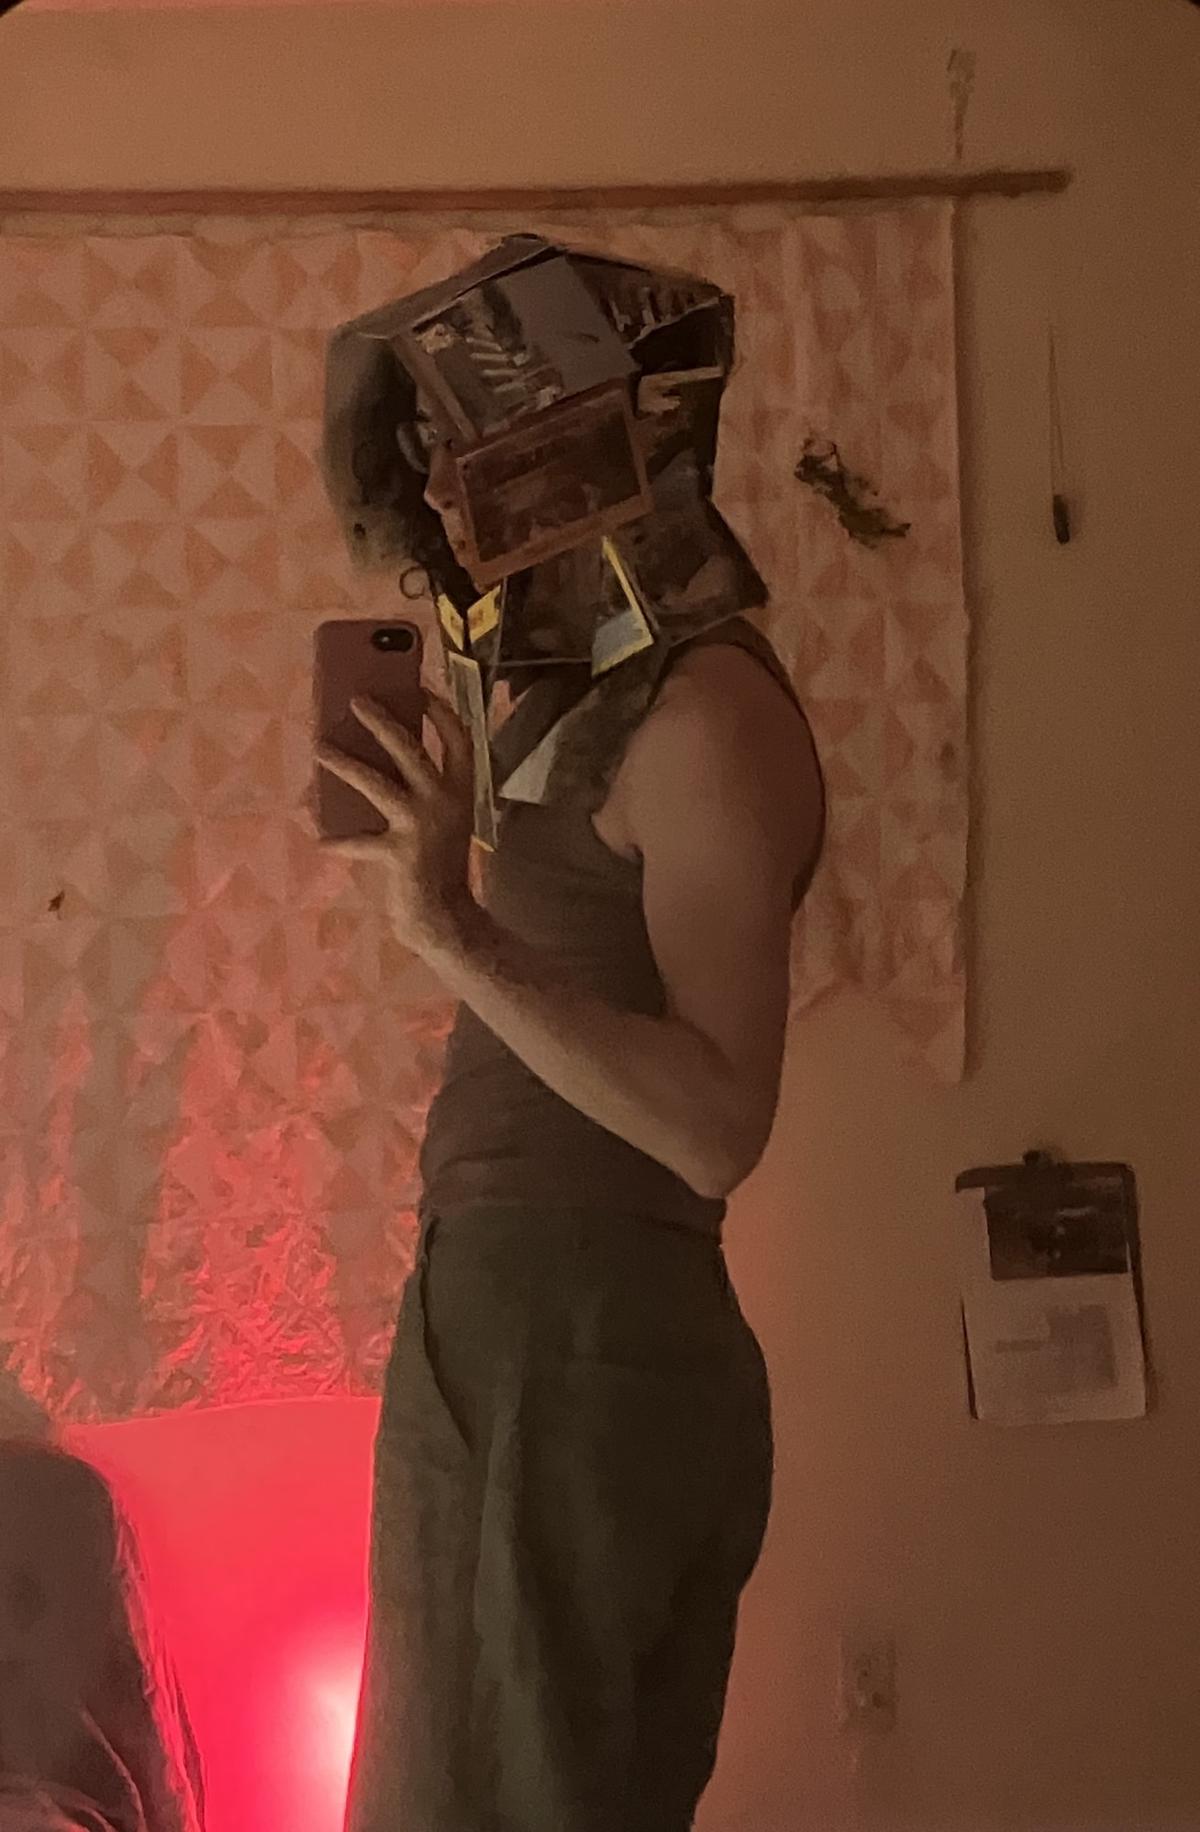 mirror selfie of rosemary wearing a tank top and a loose helmet-like hood made of cut and sewn postcards.